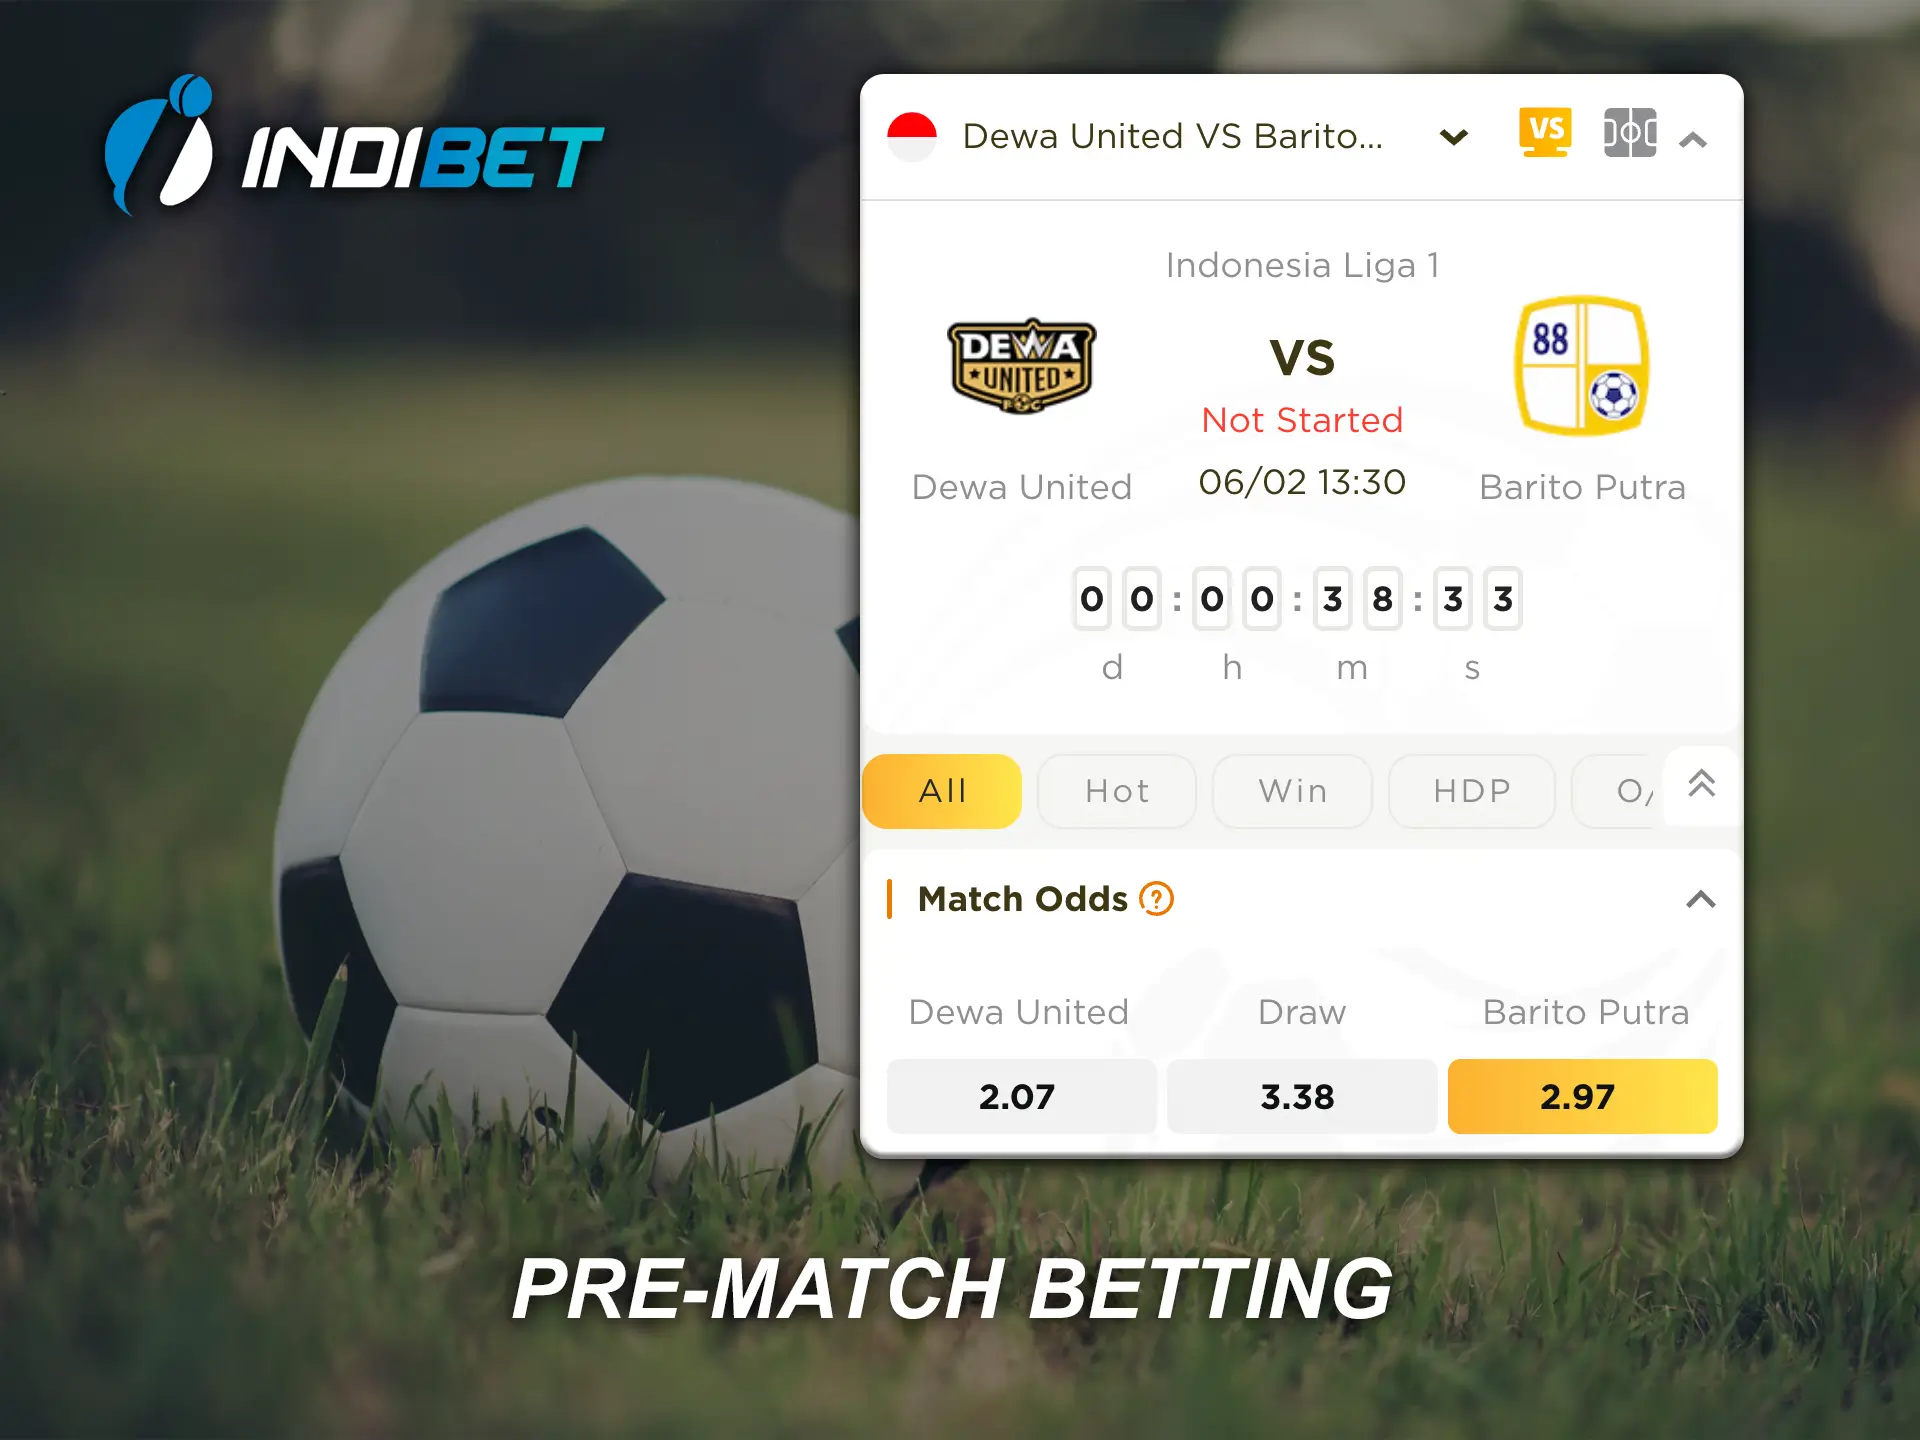 Pre-match is the best option at Indibet for fans and supporters of the same team.